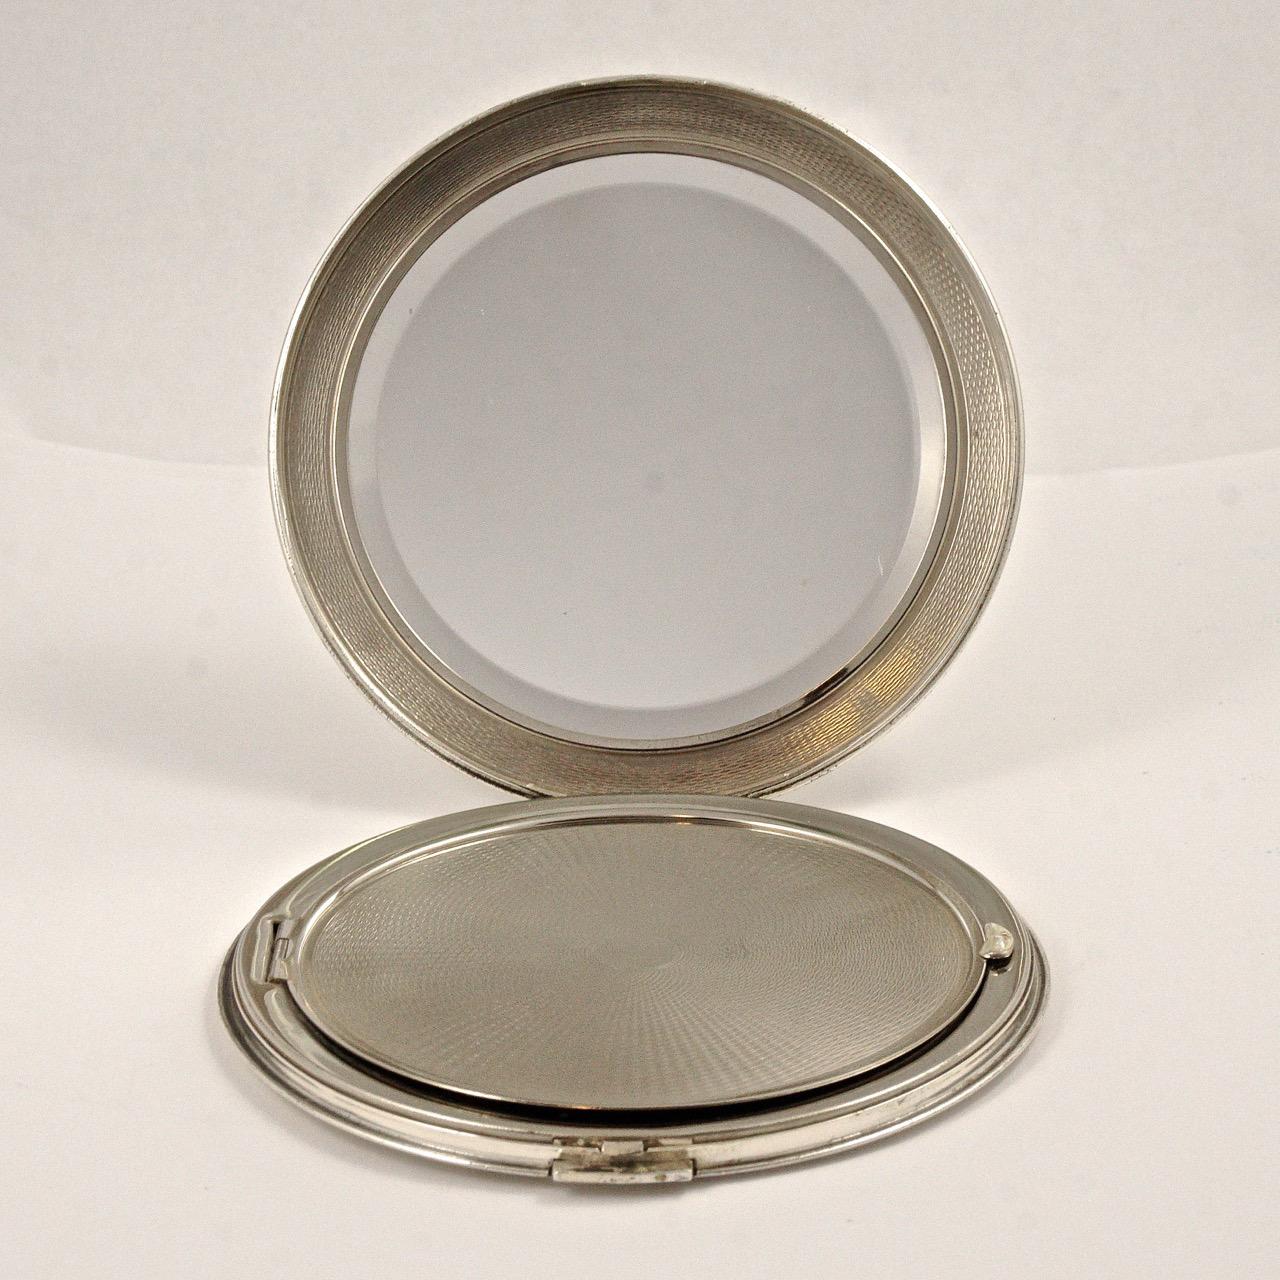 Women's or Men's West Germany Sterling Silver Powder Compact with a Leaf Design circa 1950s For Sale